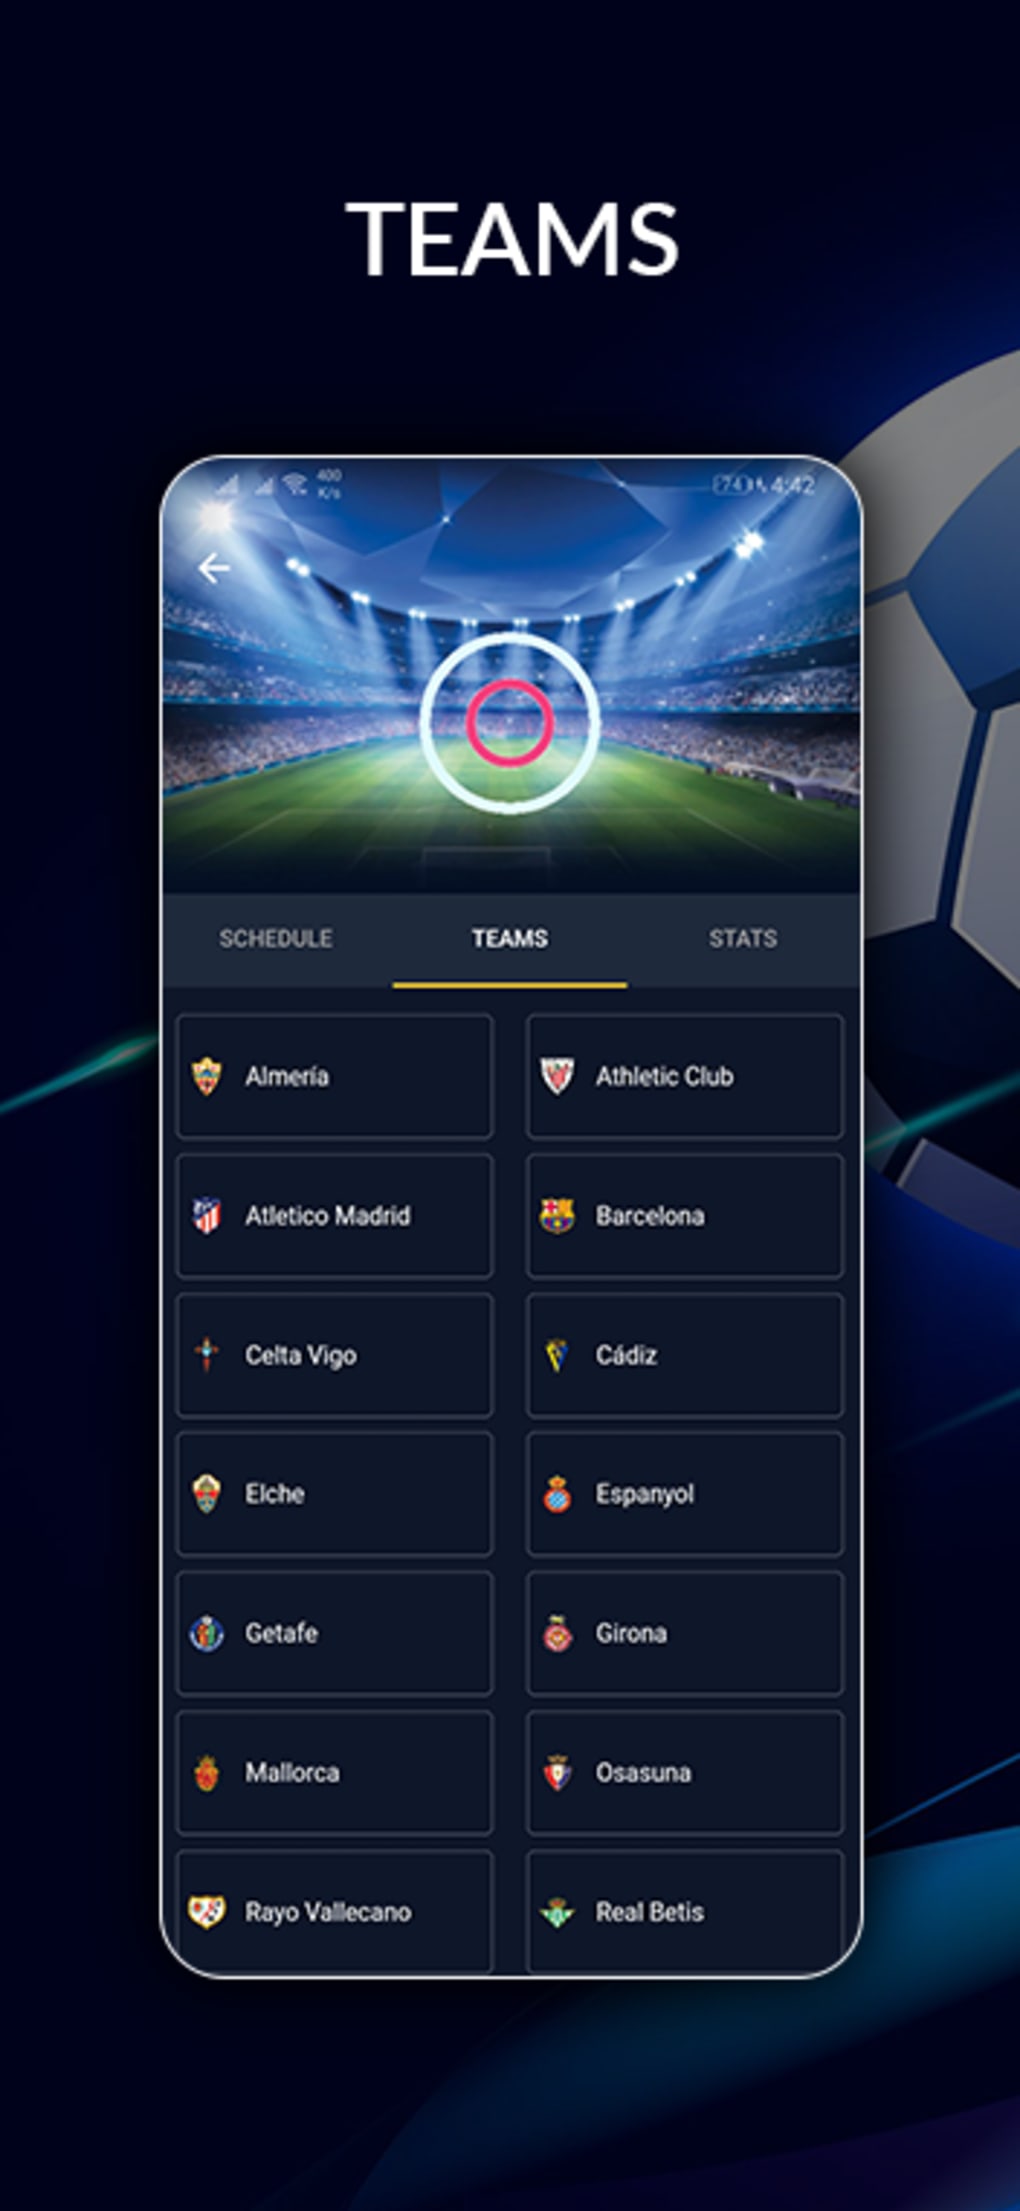 About: Bingsport - Football Live (iOS App Store version)